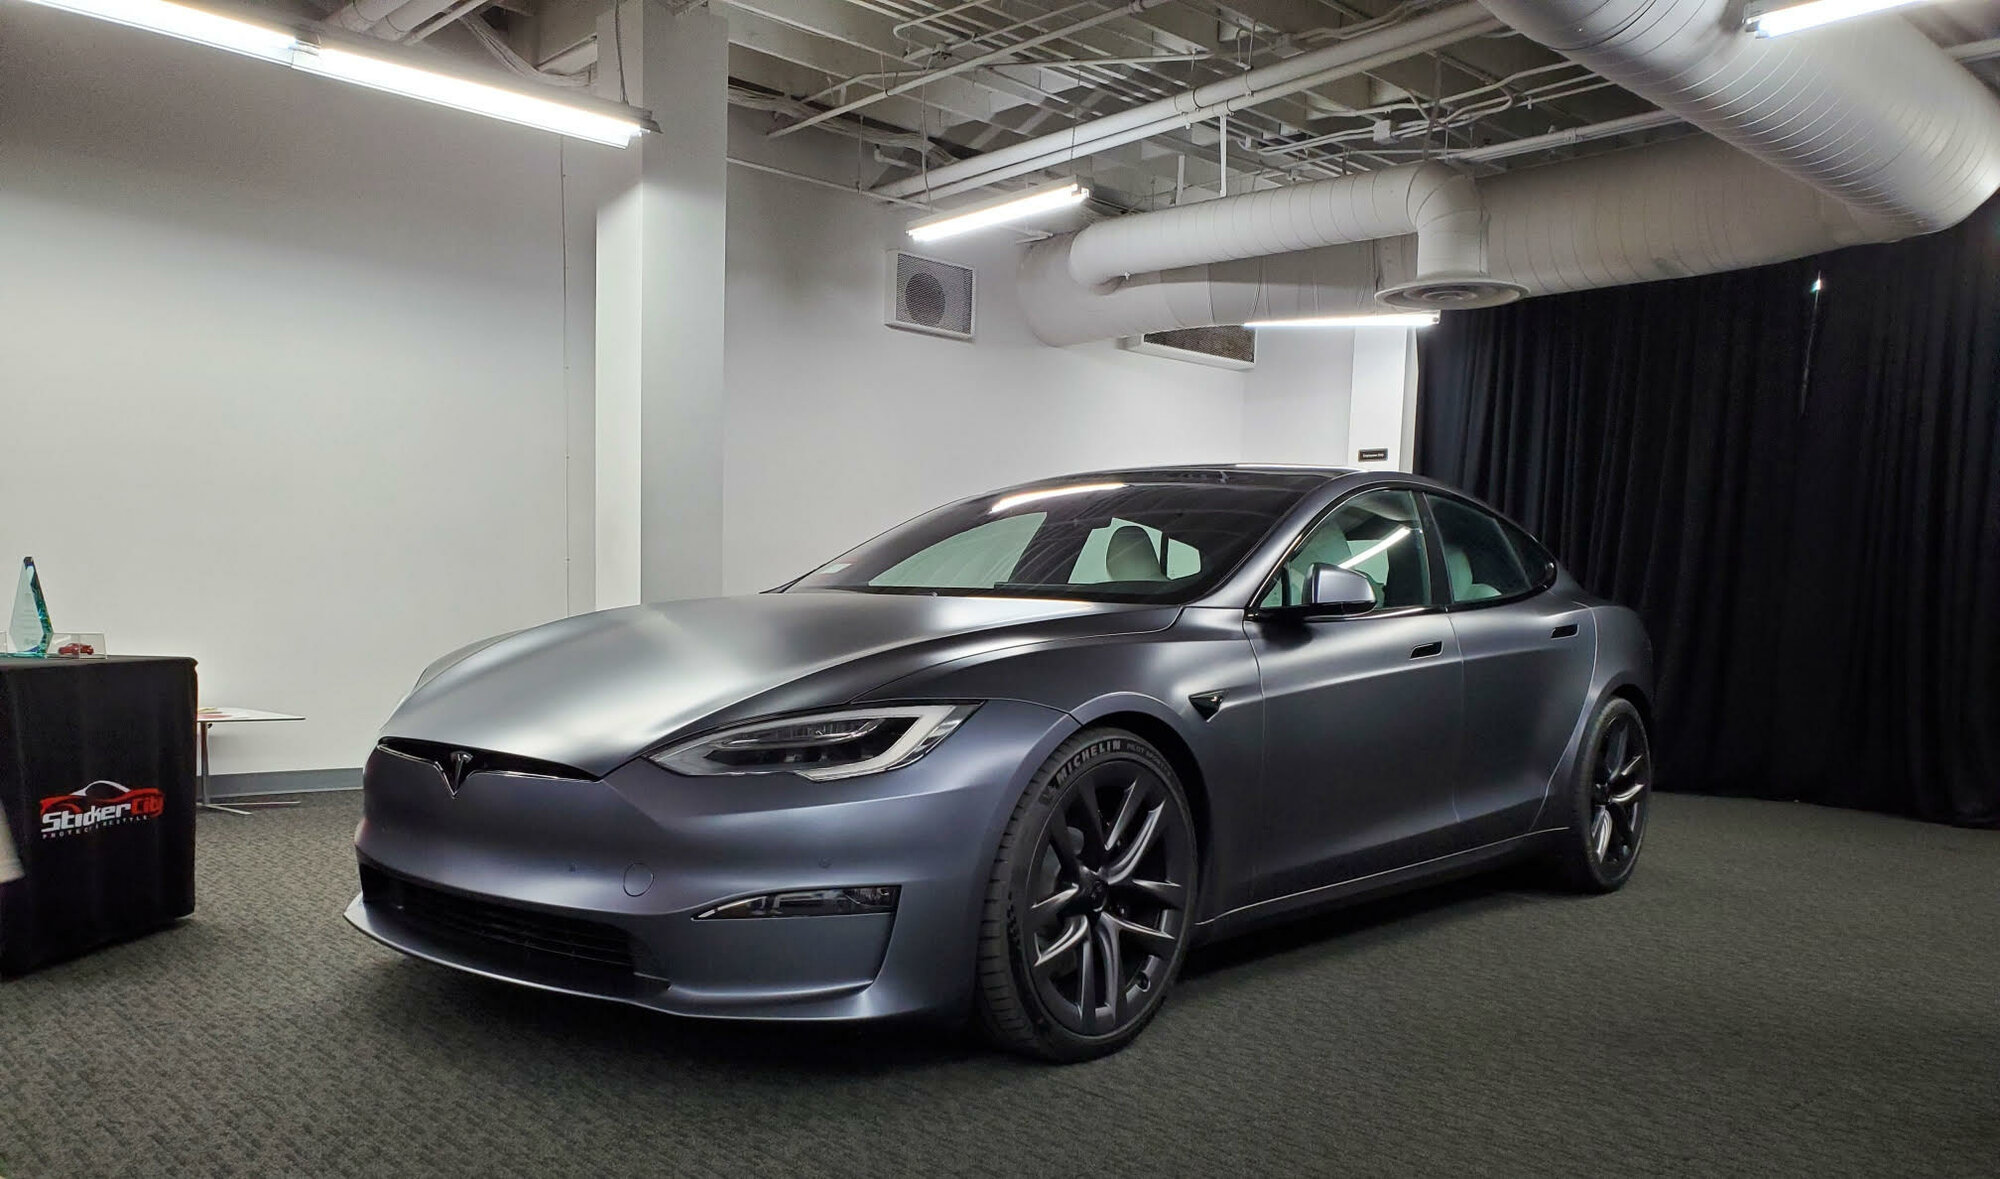 Vendor - Stealth or Gloss?? TESLA MODEL S PLAID Midnight Silver In the  Stealth Finish, Thoughts? | Tesla Motors Club